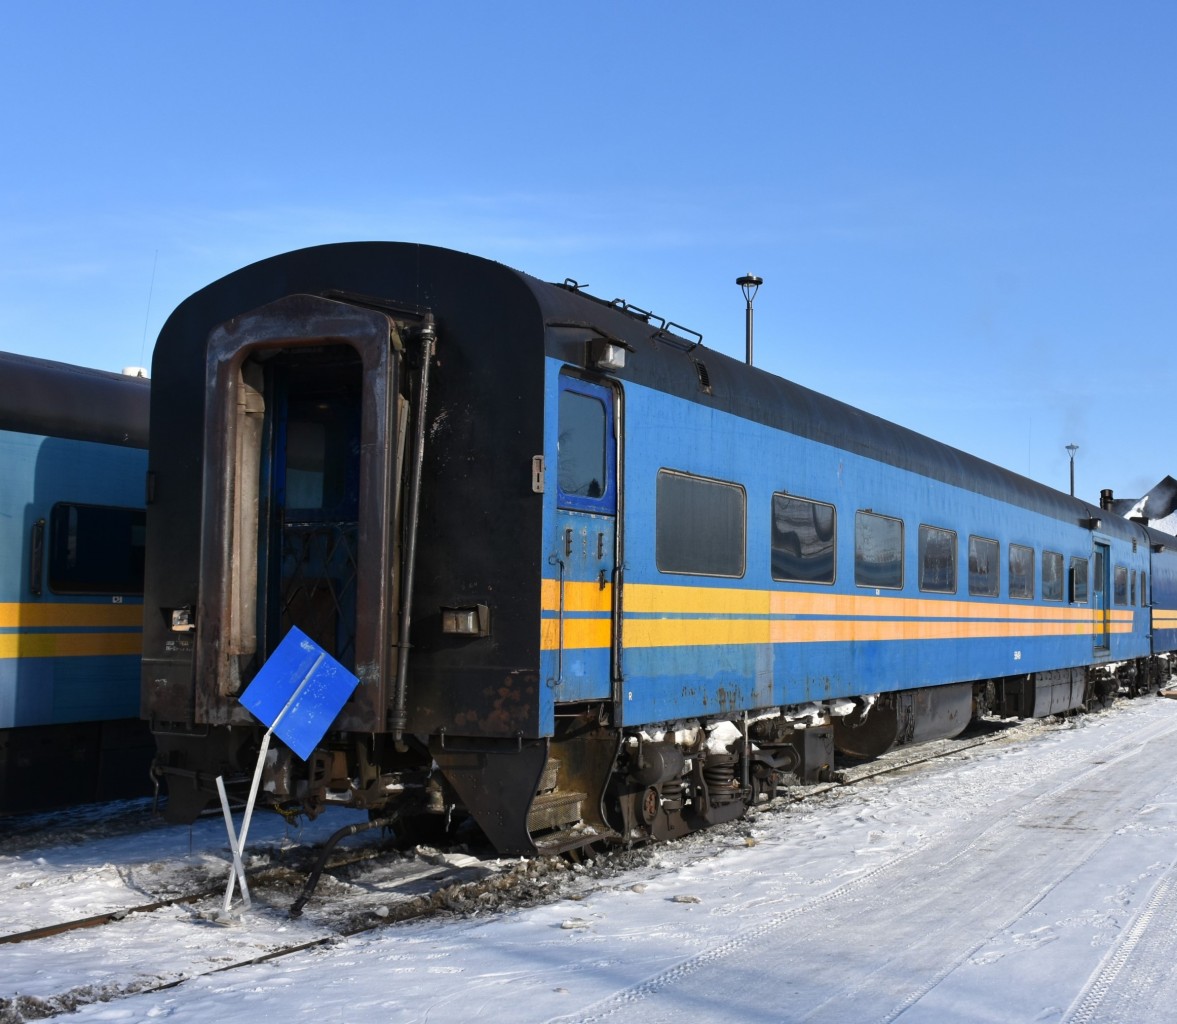 One of the two ex-VIA/exx-CN passenger cars on KRC's #291 The Pukatawagan Mixed on March 16, 2023, was KRC 5649 (ex-VIA 5649, exx-CN 5649) Class PB-79-A, 79 foot First Class car. It was built by CC&F in 1954, and converted to it's current baggage/coach configuration in 1998. 
Prior to being placed behind the locomotives for today's departure, KRC 5649 sits at the south end of The Pas station plugged in to wayside power and coupled to baggage car KRC 9631 .